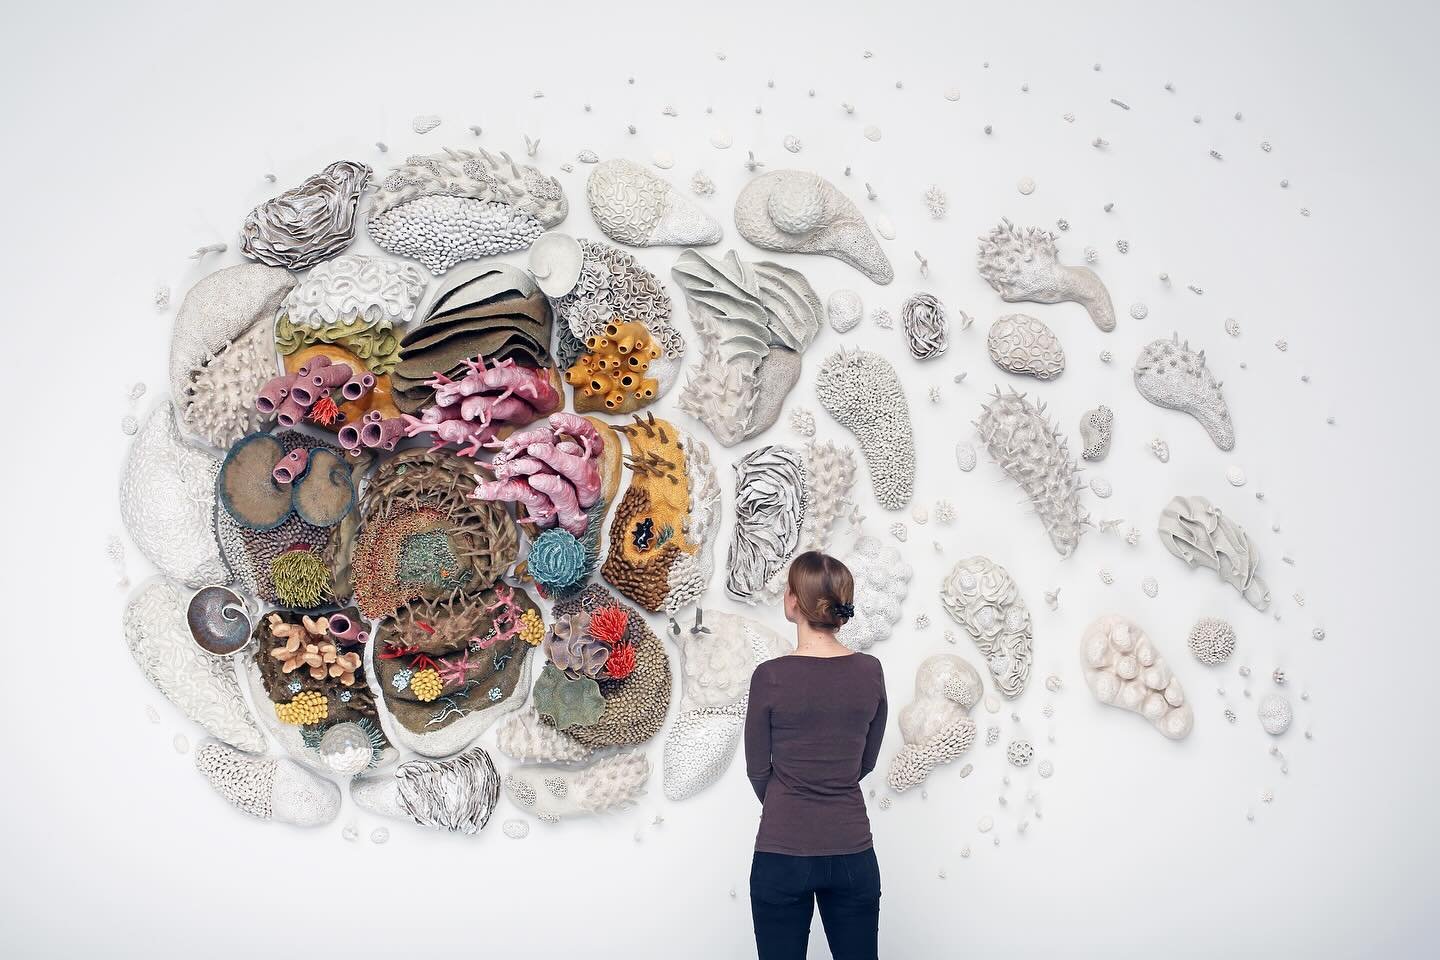 it&rsquo;s been a wild 10 years since I first debuted OUR CHANGING SEAS III at the @tangteachingmuseum in 2014 and the wonderful folks at @colossal shared it for EARTH DAY 🌏 &bull; in that time there have been 2 global coral bleaching events caused 